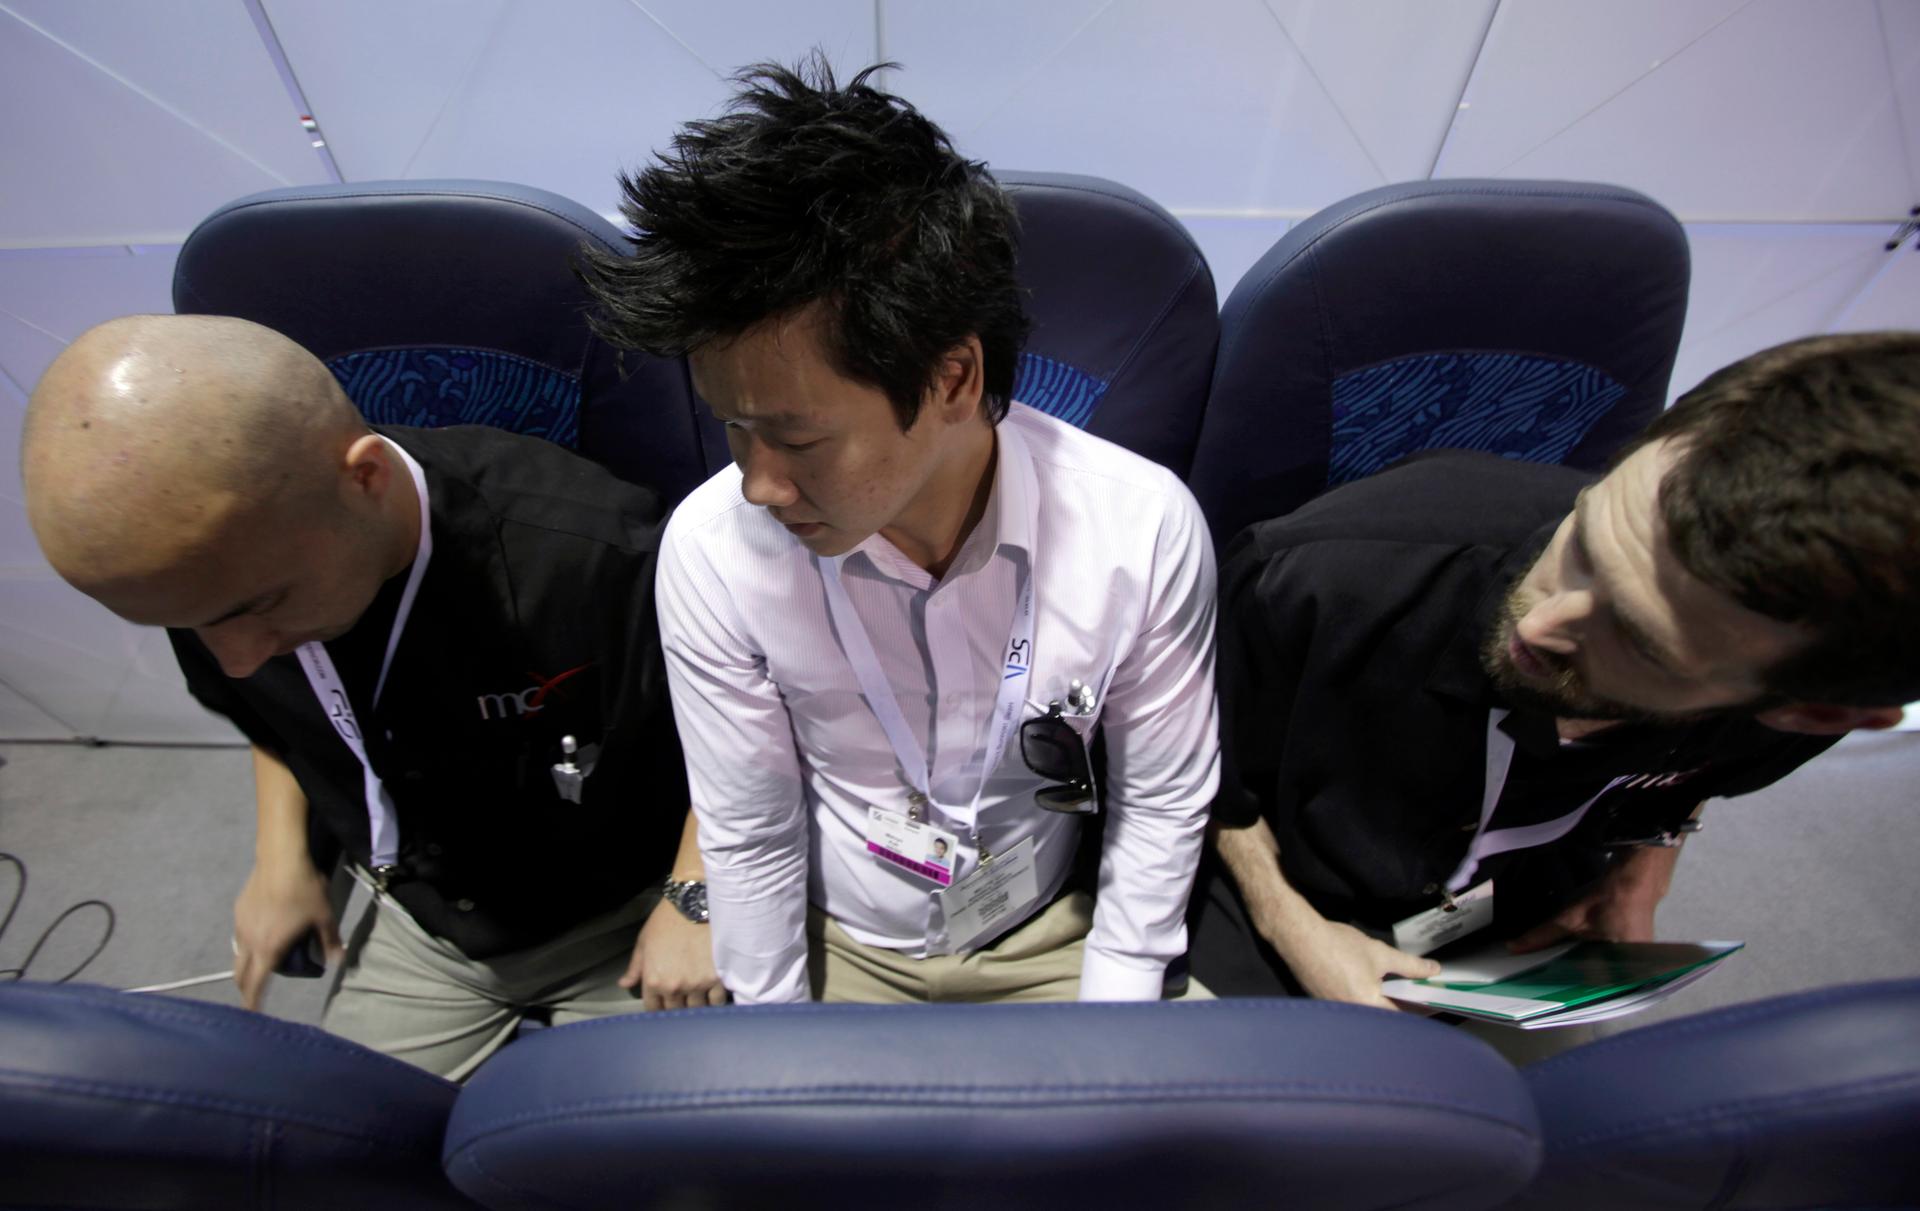 Melvyn Koh, at center, tries out Italian company Aviointeriors' aircraft "standing seat" which has 23 inches of legroom instead of the current economy class average of 30 inches.